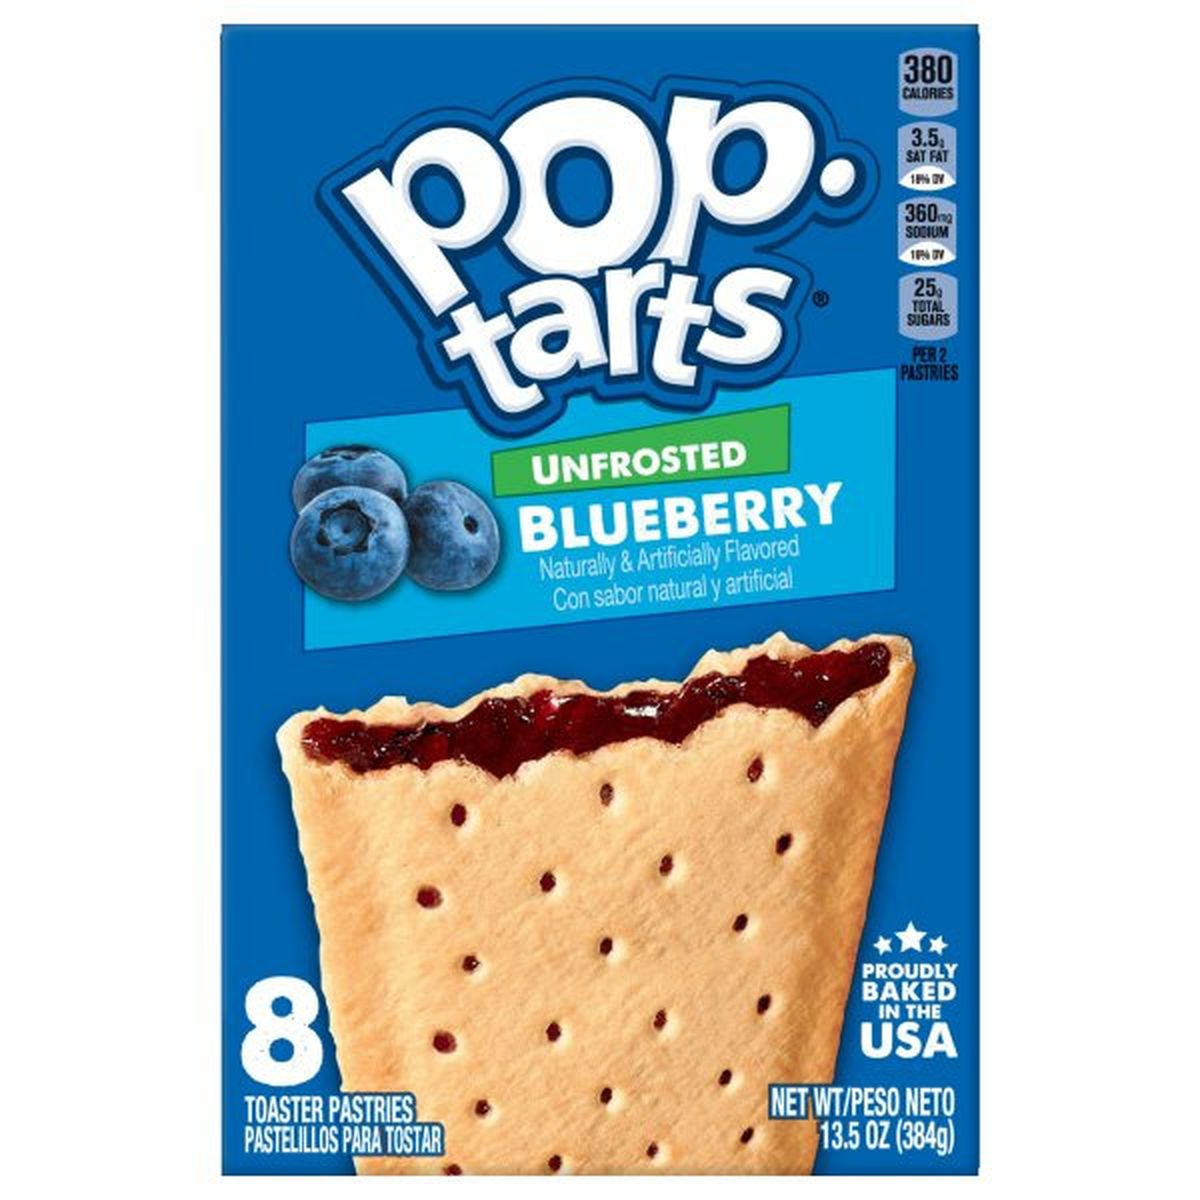 Calories in Kellogg's Pop-Tarts Toaster Pastries, Unfrosted, Blueberry